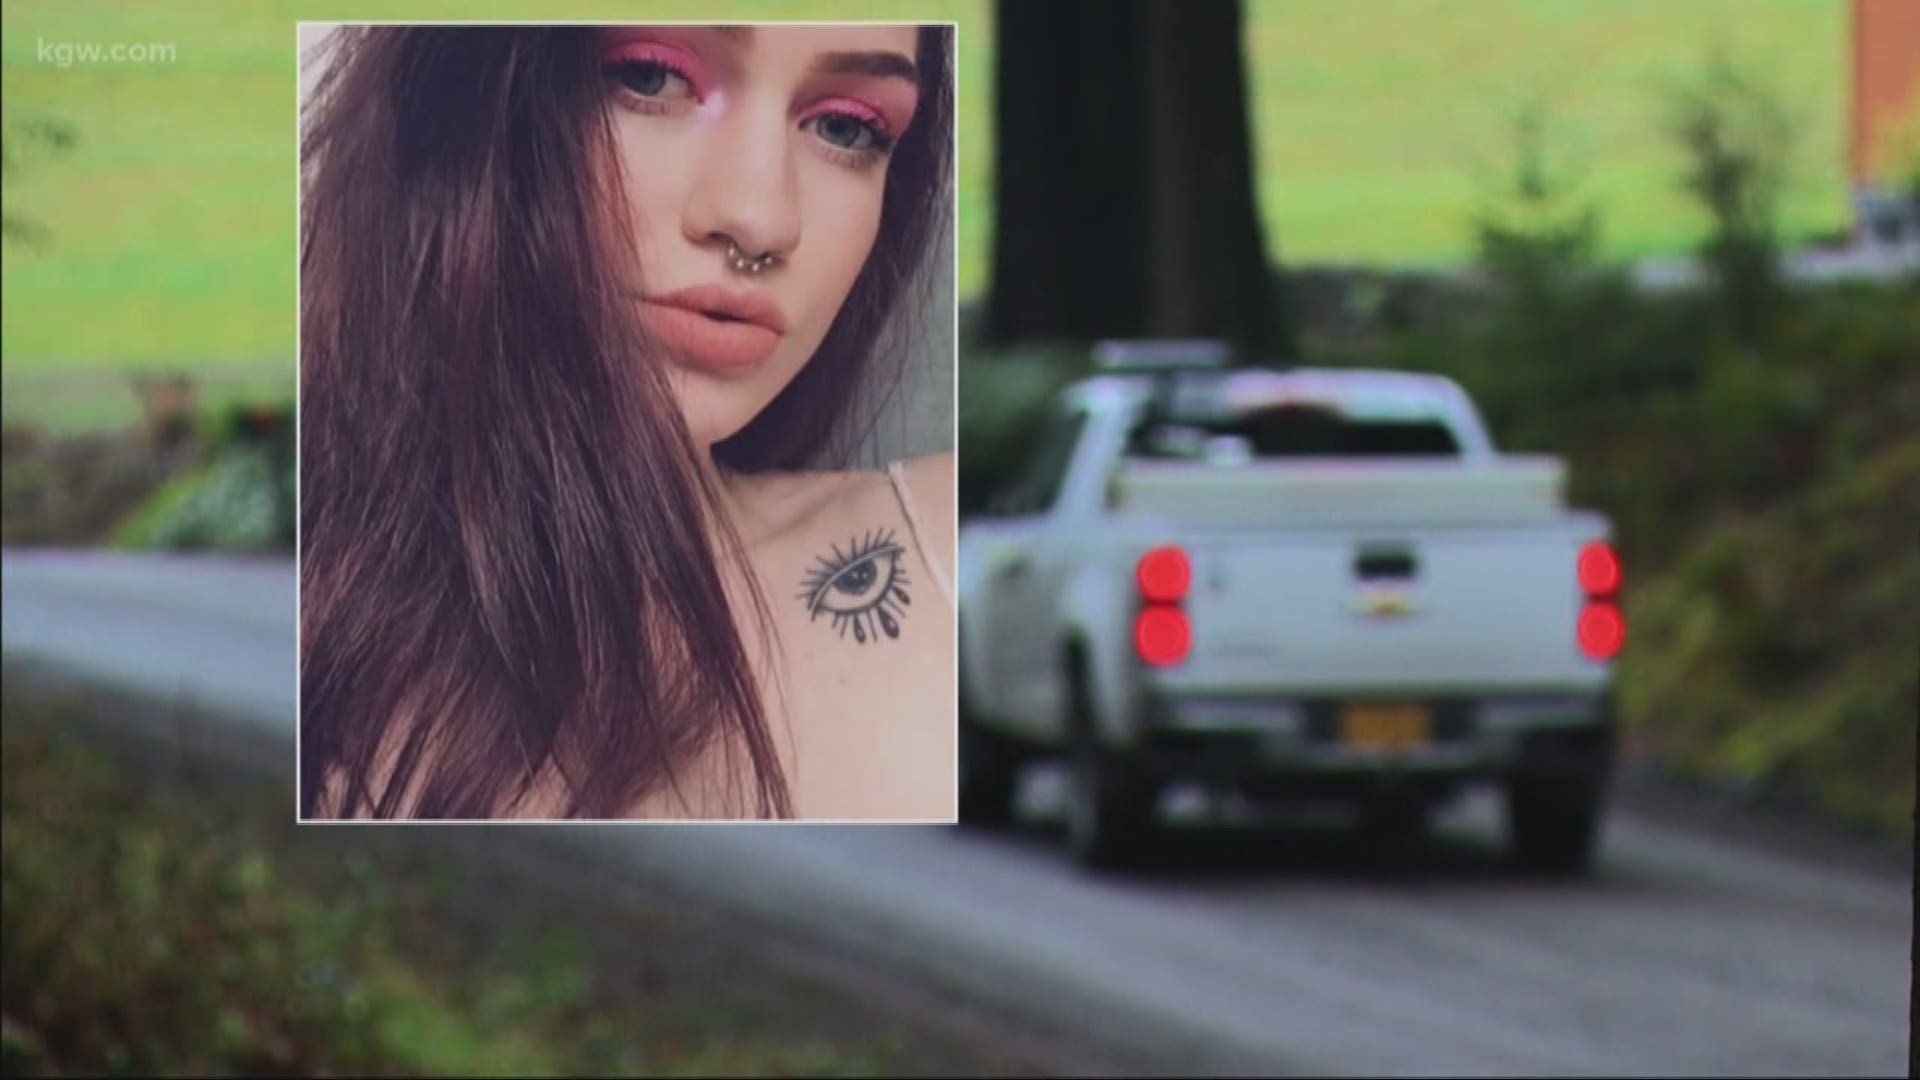 20-year-old Allyson Watterson has been missing since Dec. 22. She was last seen hiking near North Plains with her boyfriend.